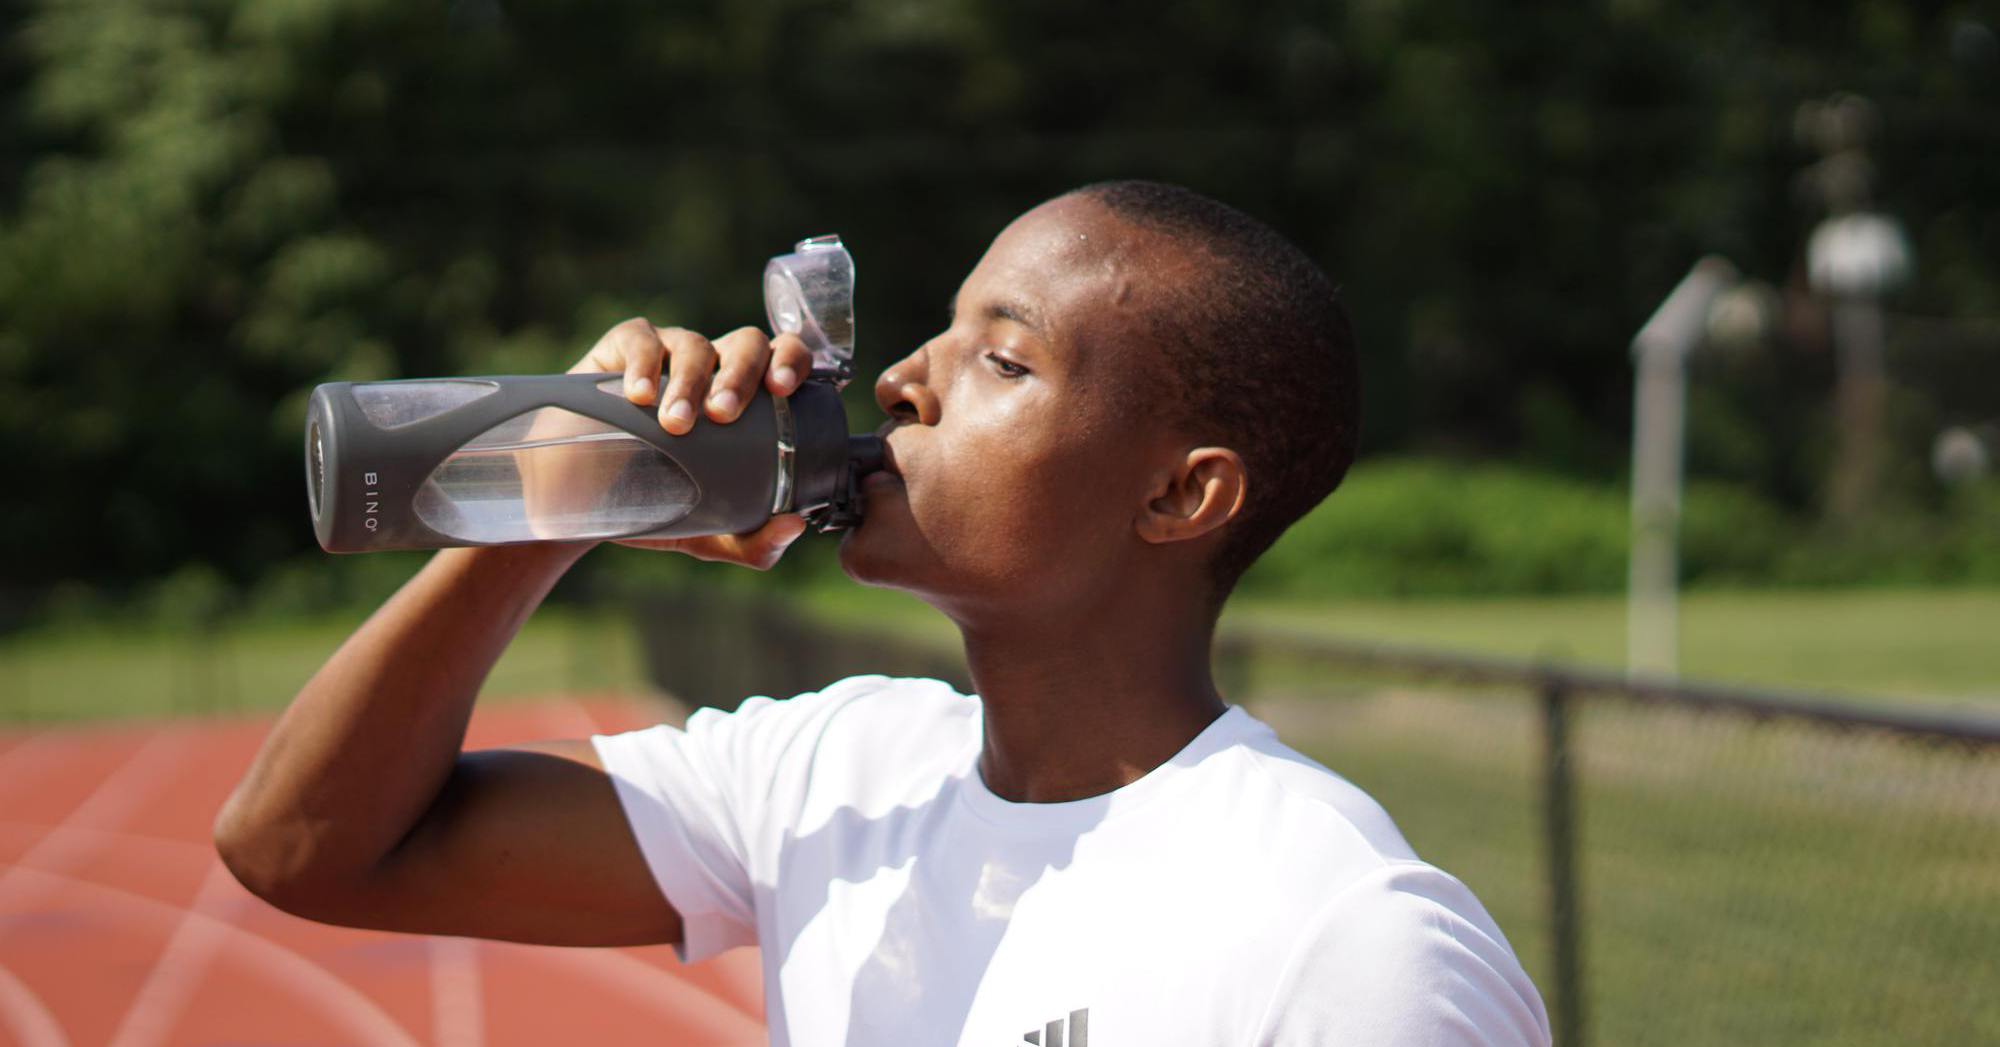 Lose a lot of weight by knowing how to drink water properly